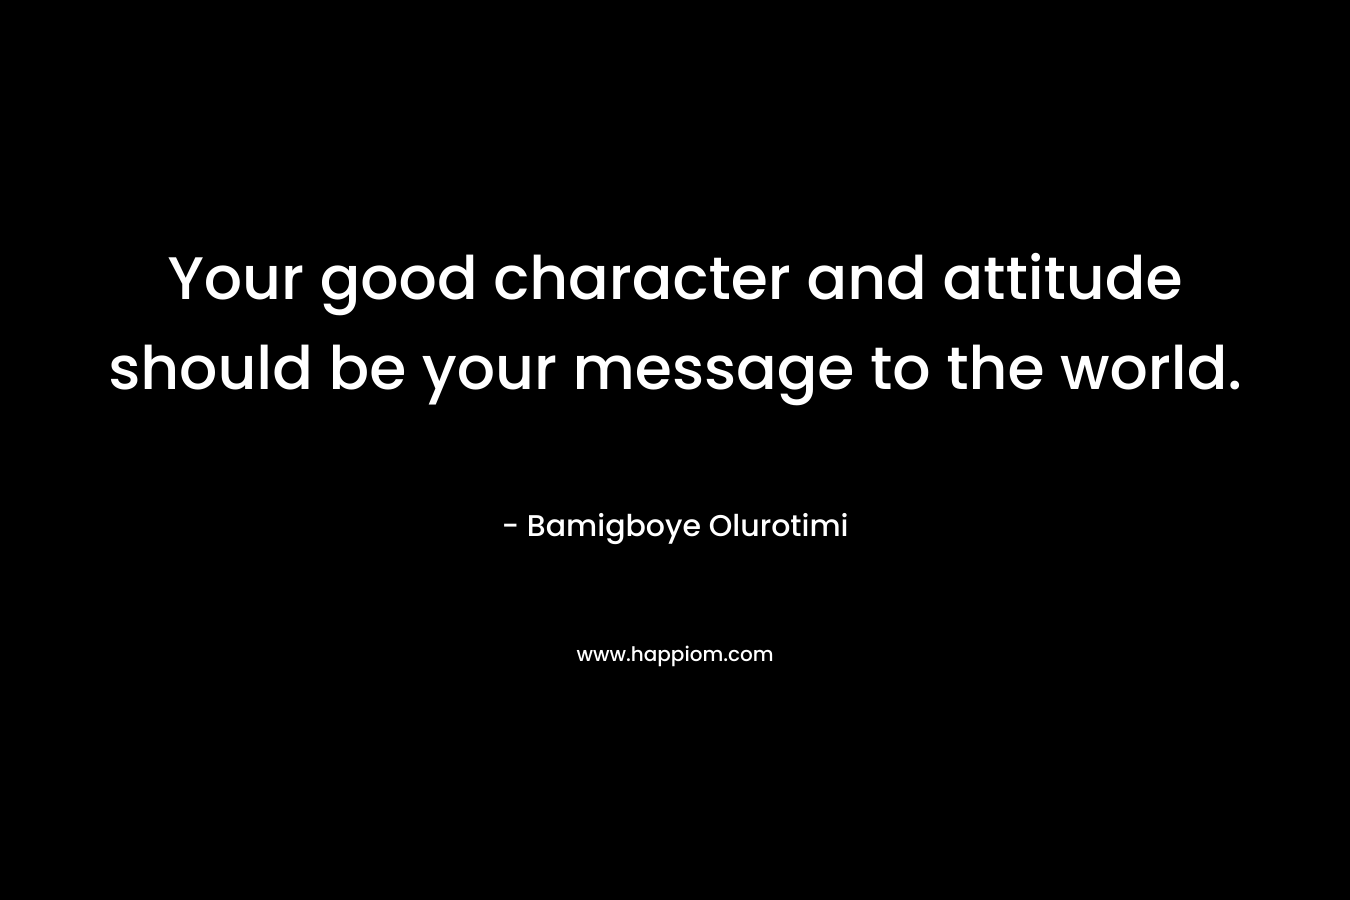 Your good character and attitude should be your message to the world.